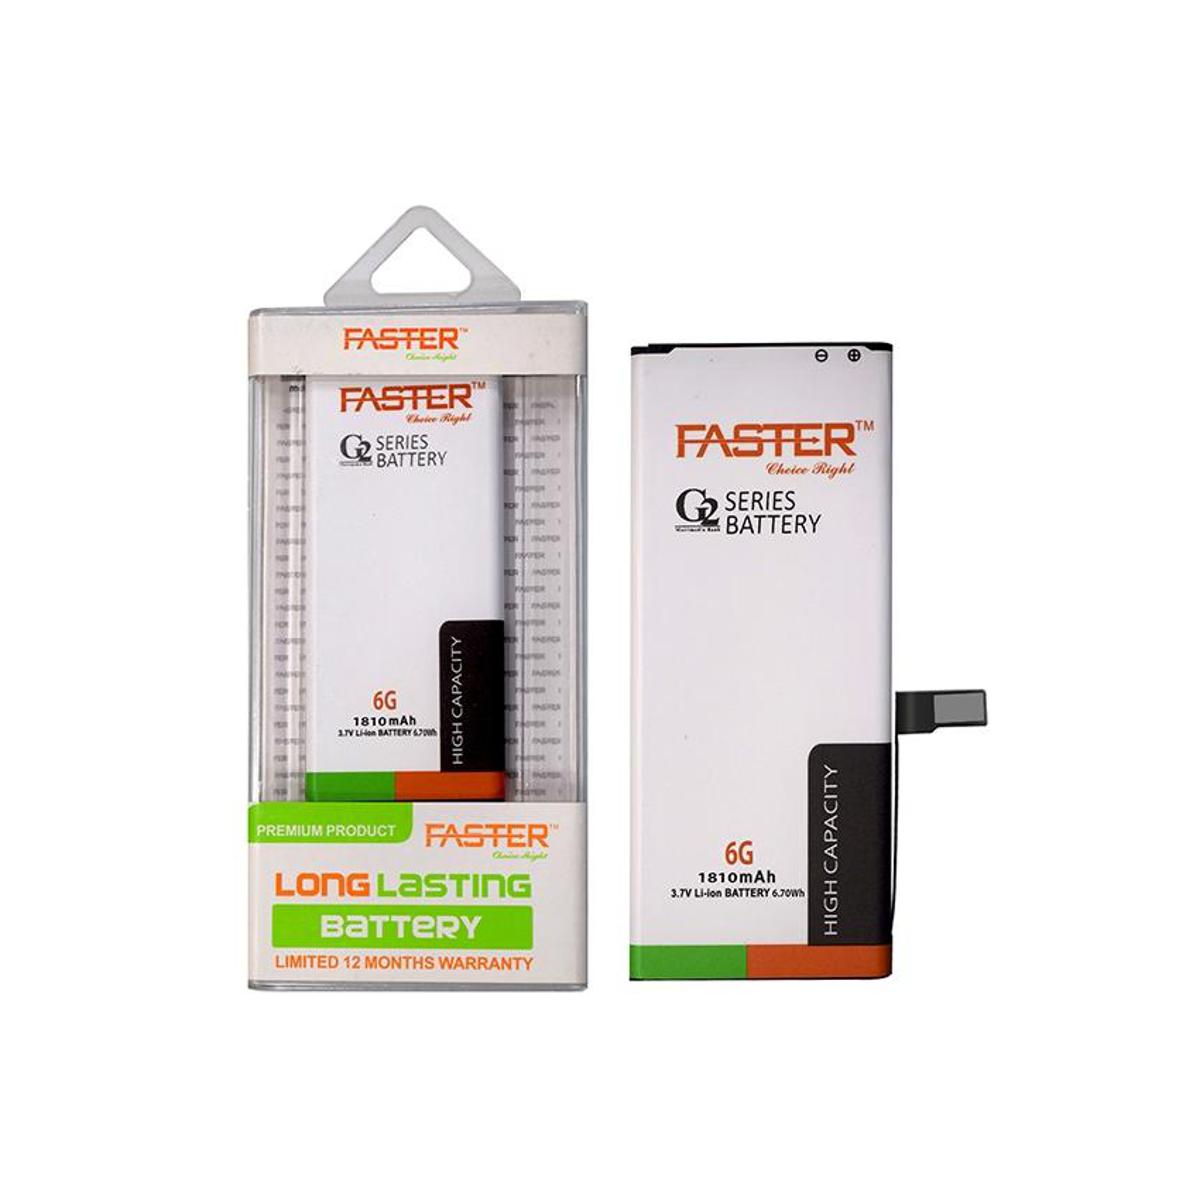 FASTER G2 Series Long Lasting Battery For iPHONE 6G 1810 mAh